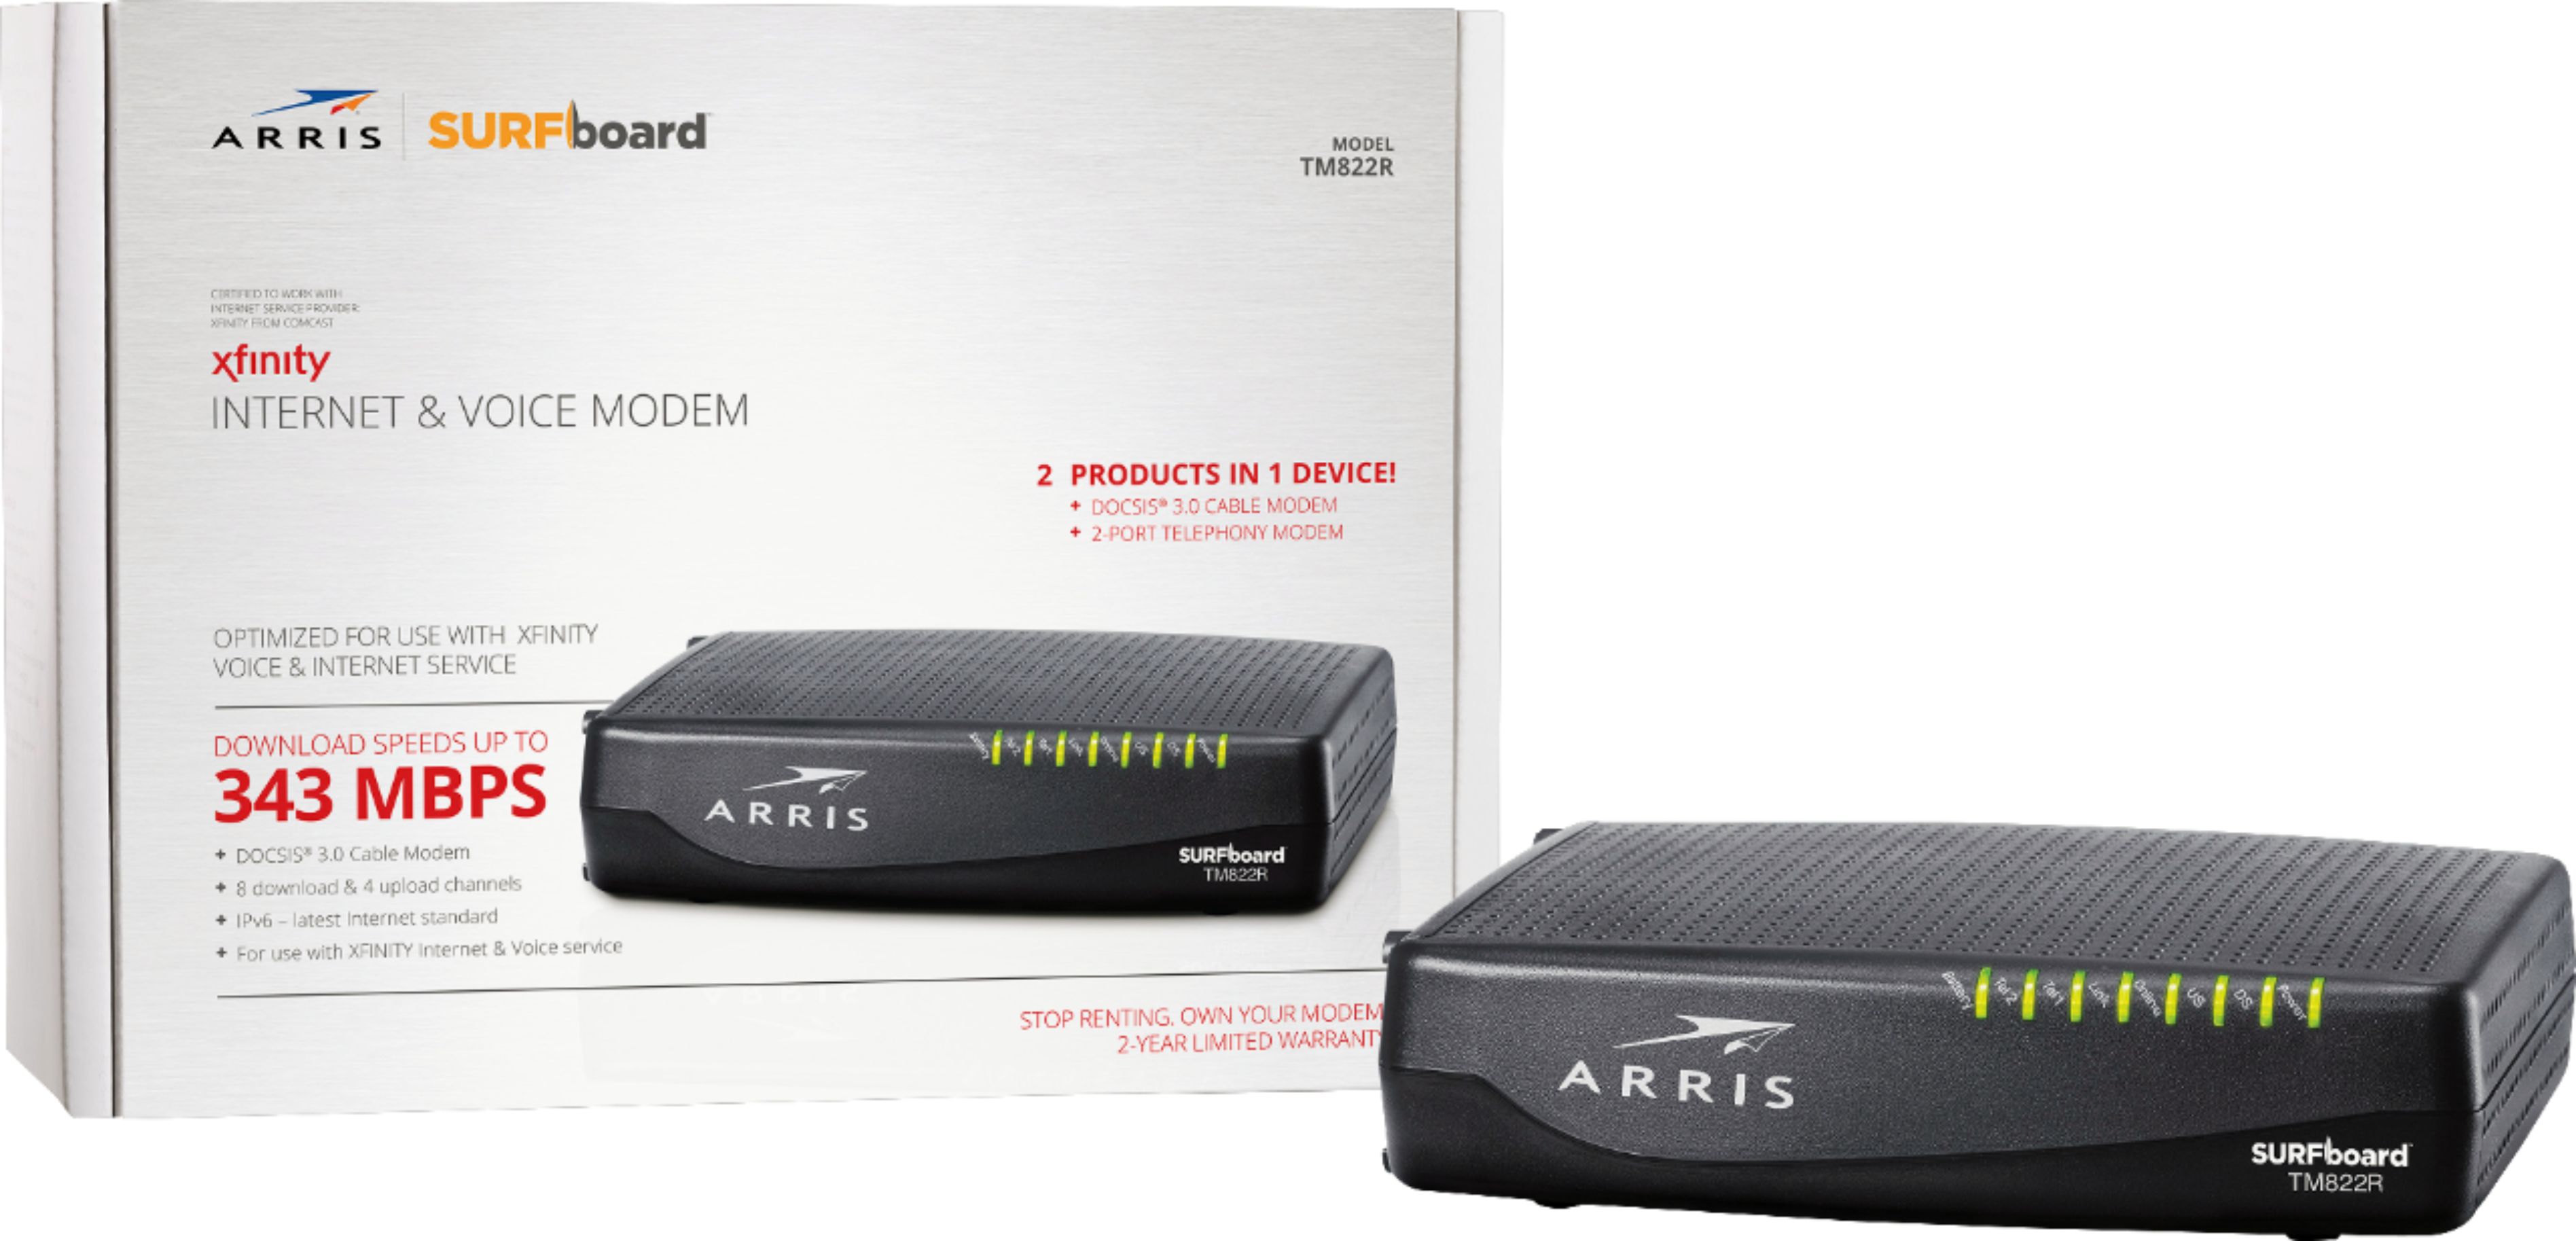 Arris Cable Modem SURFboard 3.0 Internet Pc Connect Fast Broadband Speed 